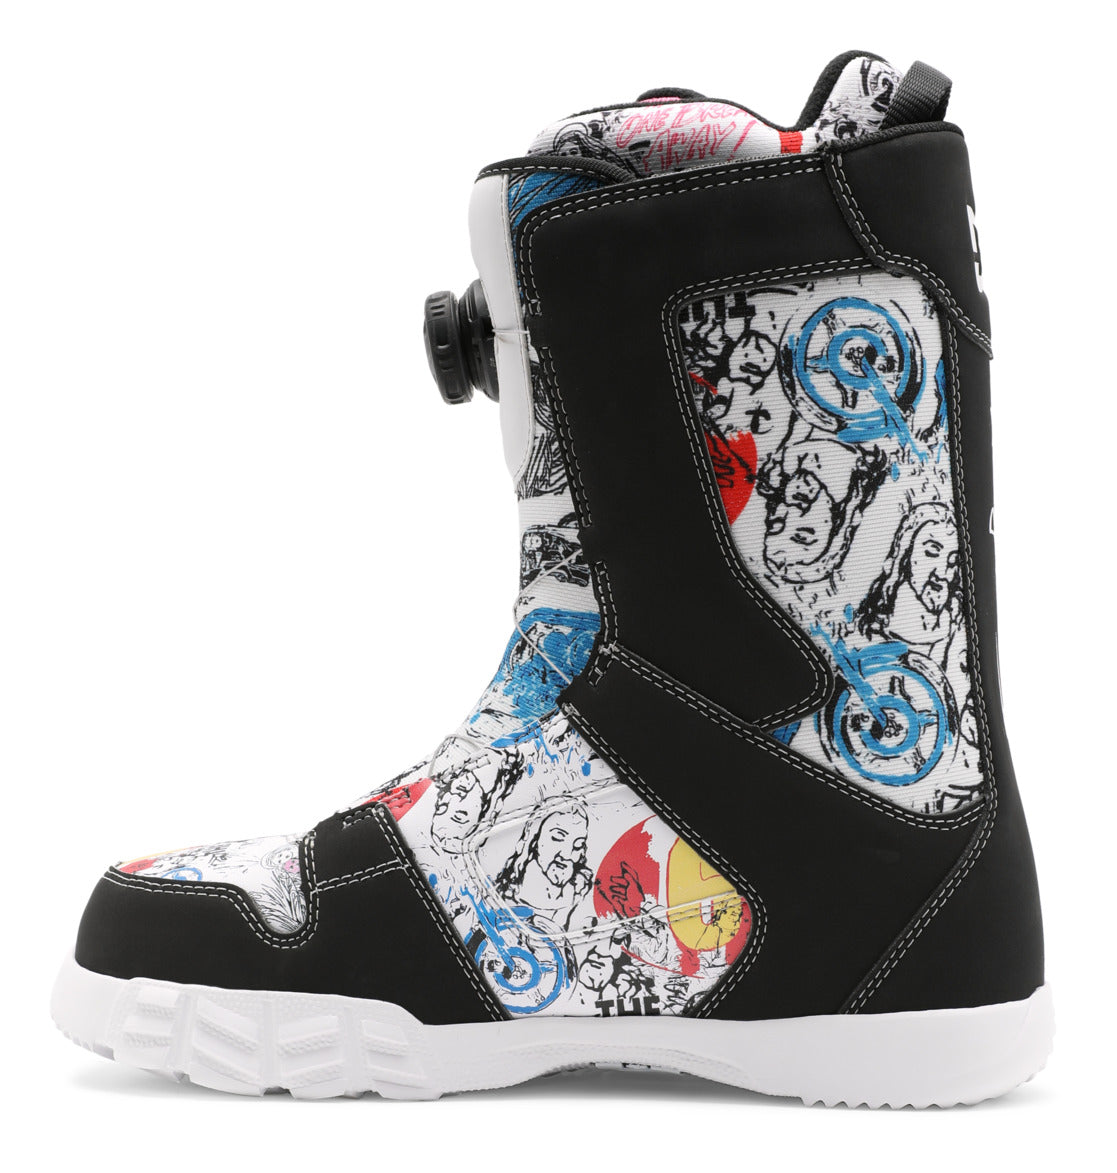 Men's Andy Warhol x DC Shoes Phase BOA® Snowboard Boots - DC Shoes